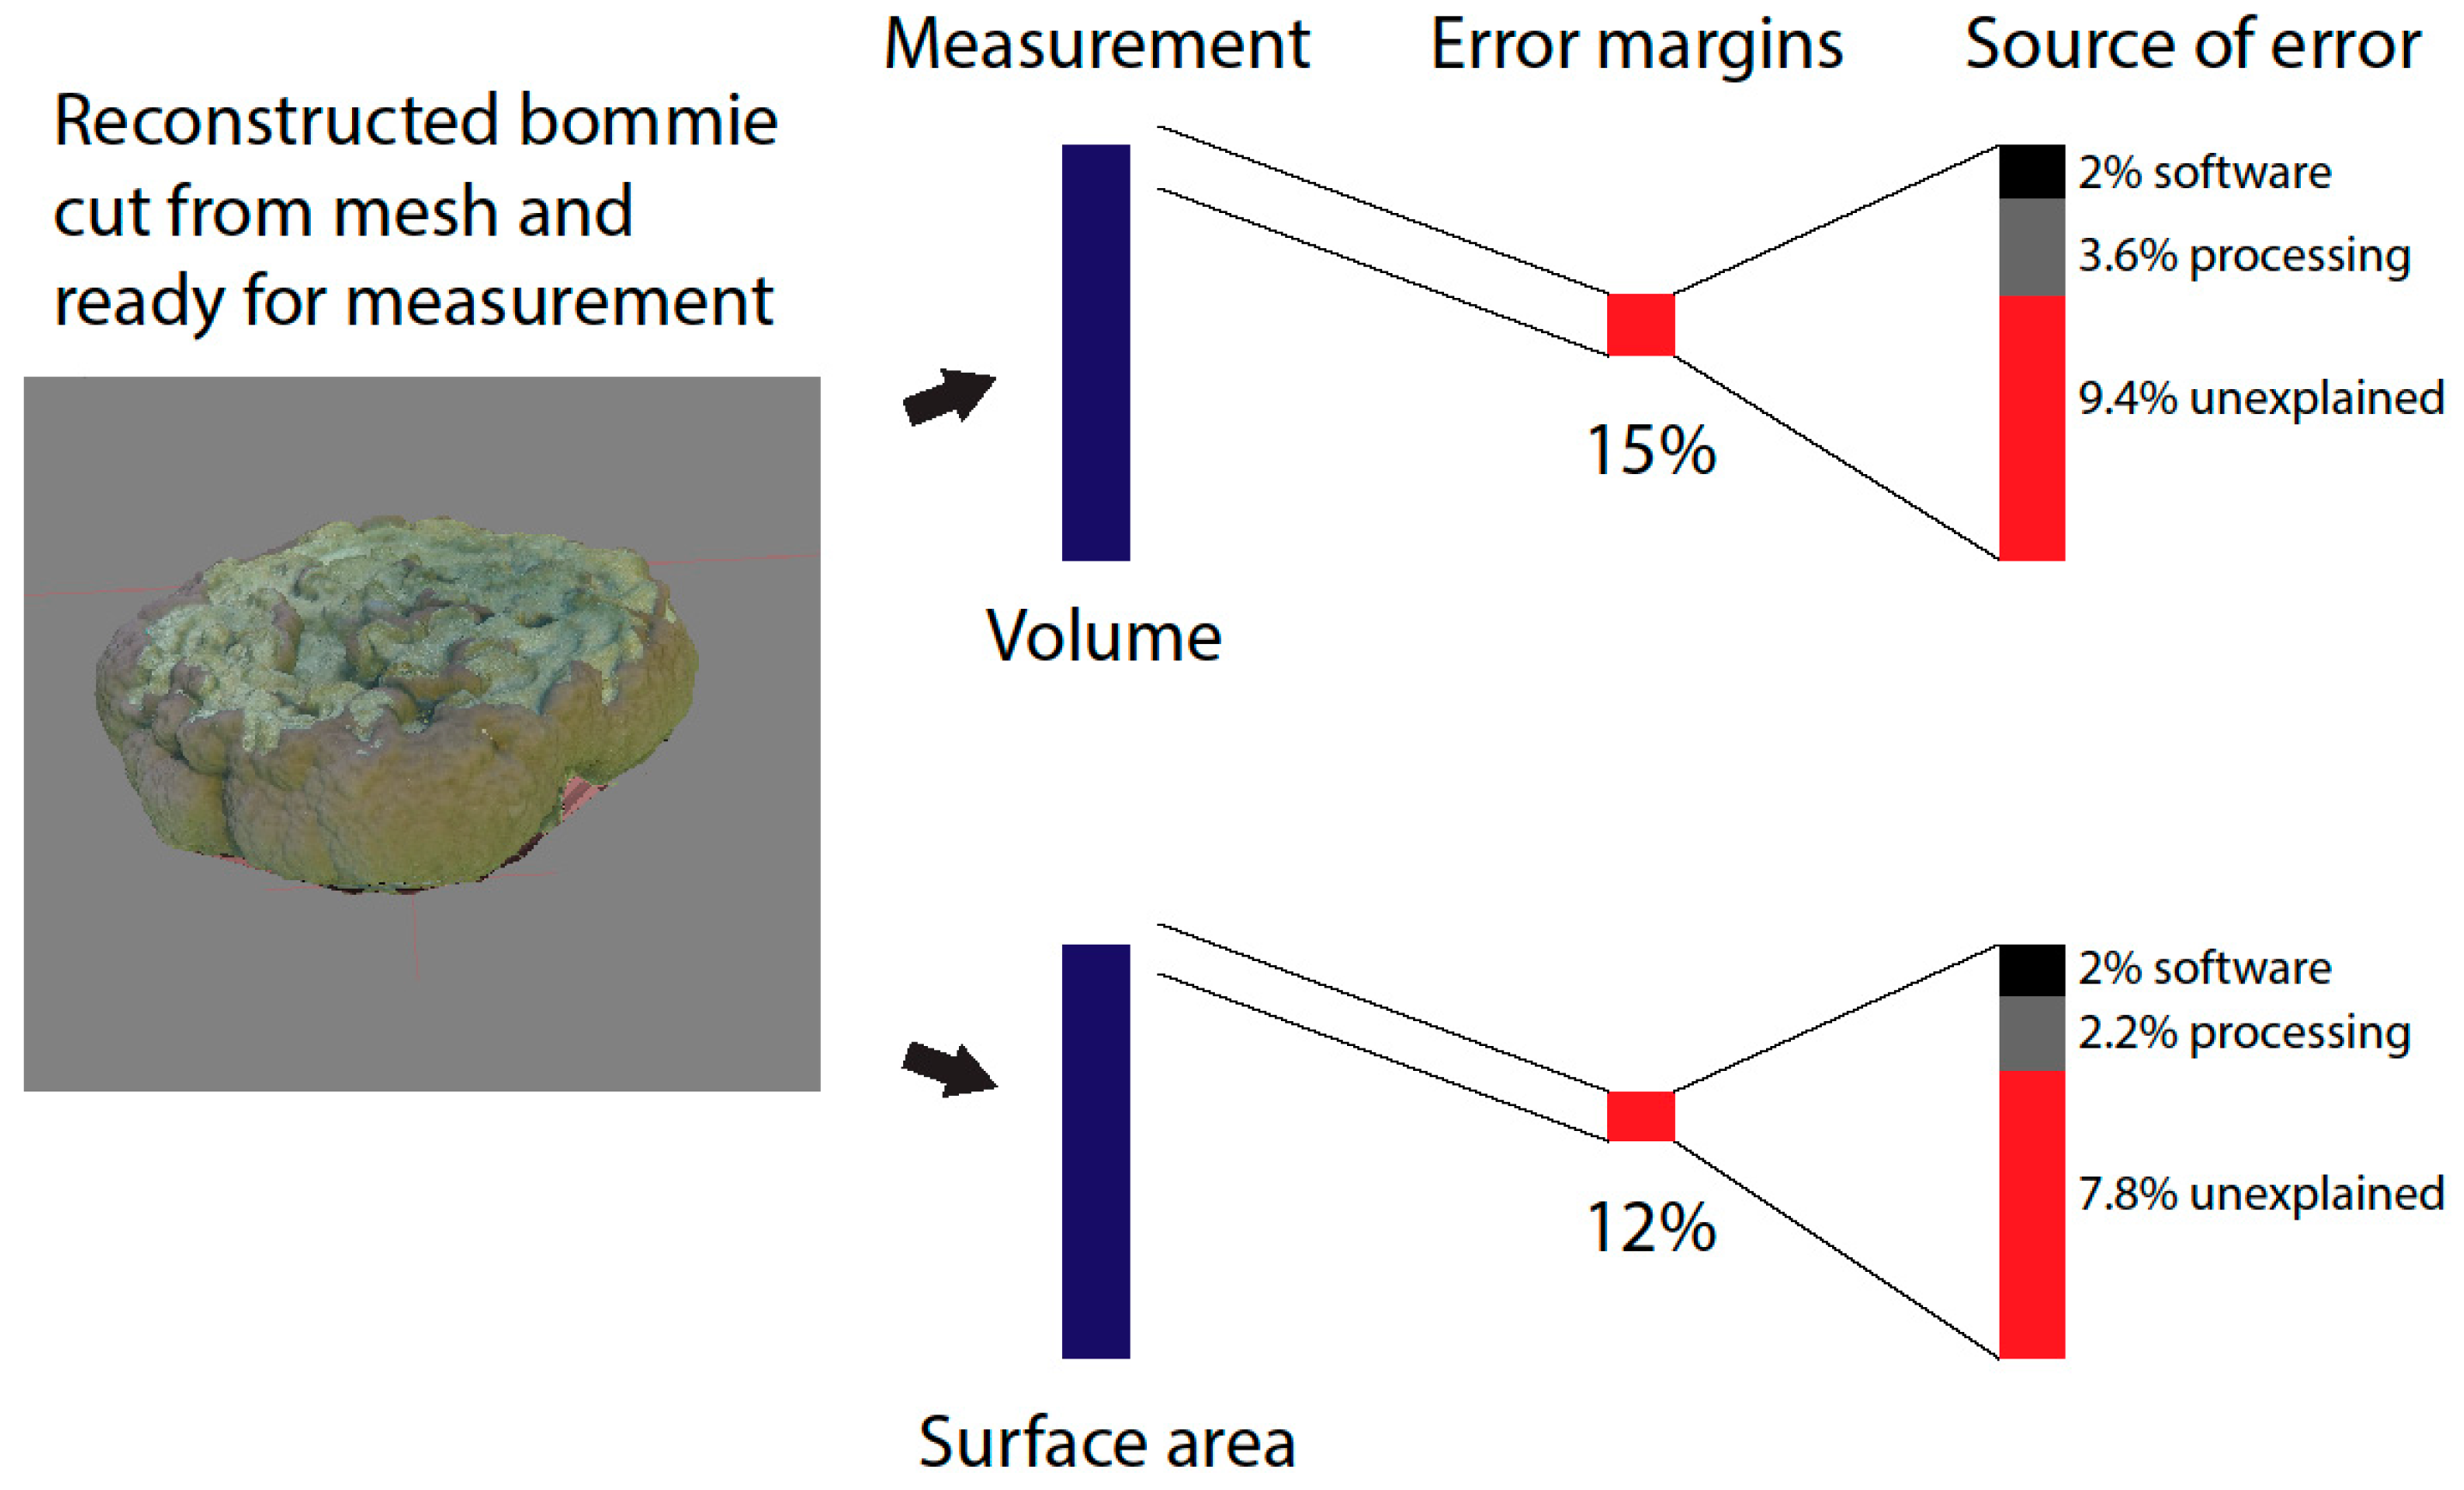 Remote Sensing | Free Full-Text | How Reliable Is Structure from Motion  (SfM) over Time and between Observers? A Case Study Using Coral Reef Bommies